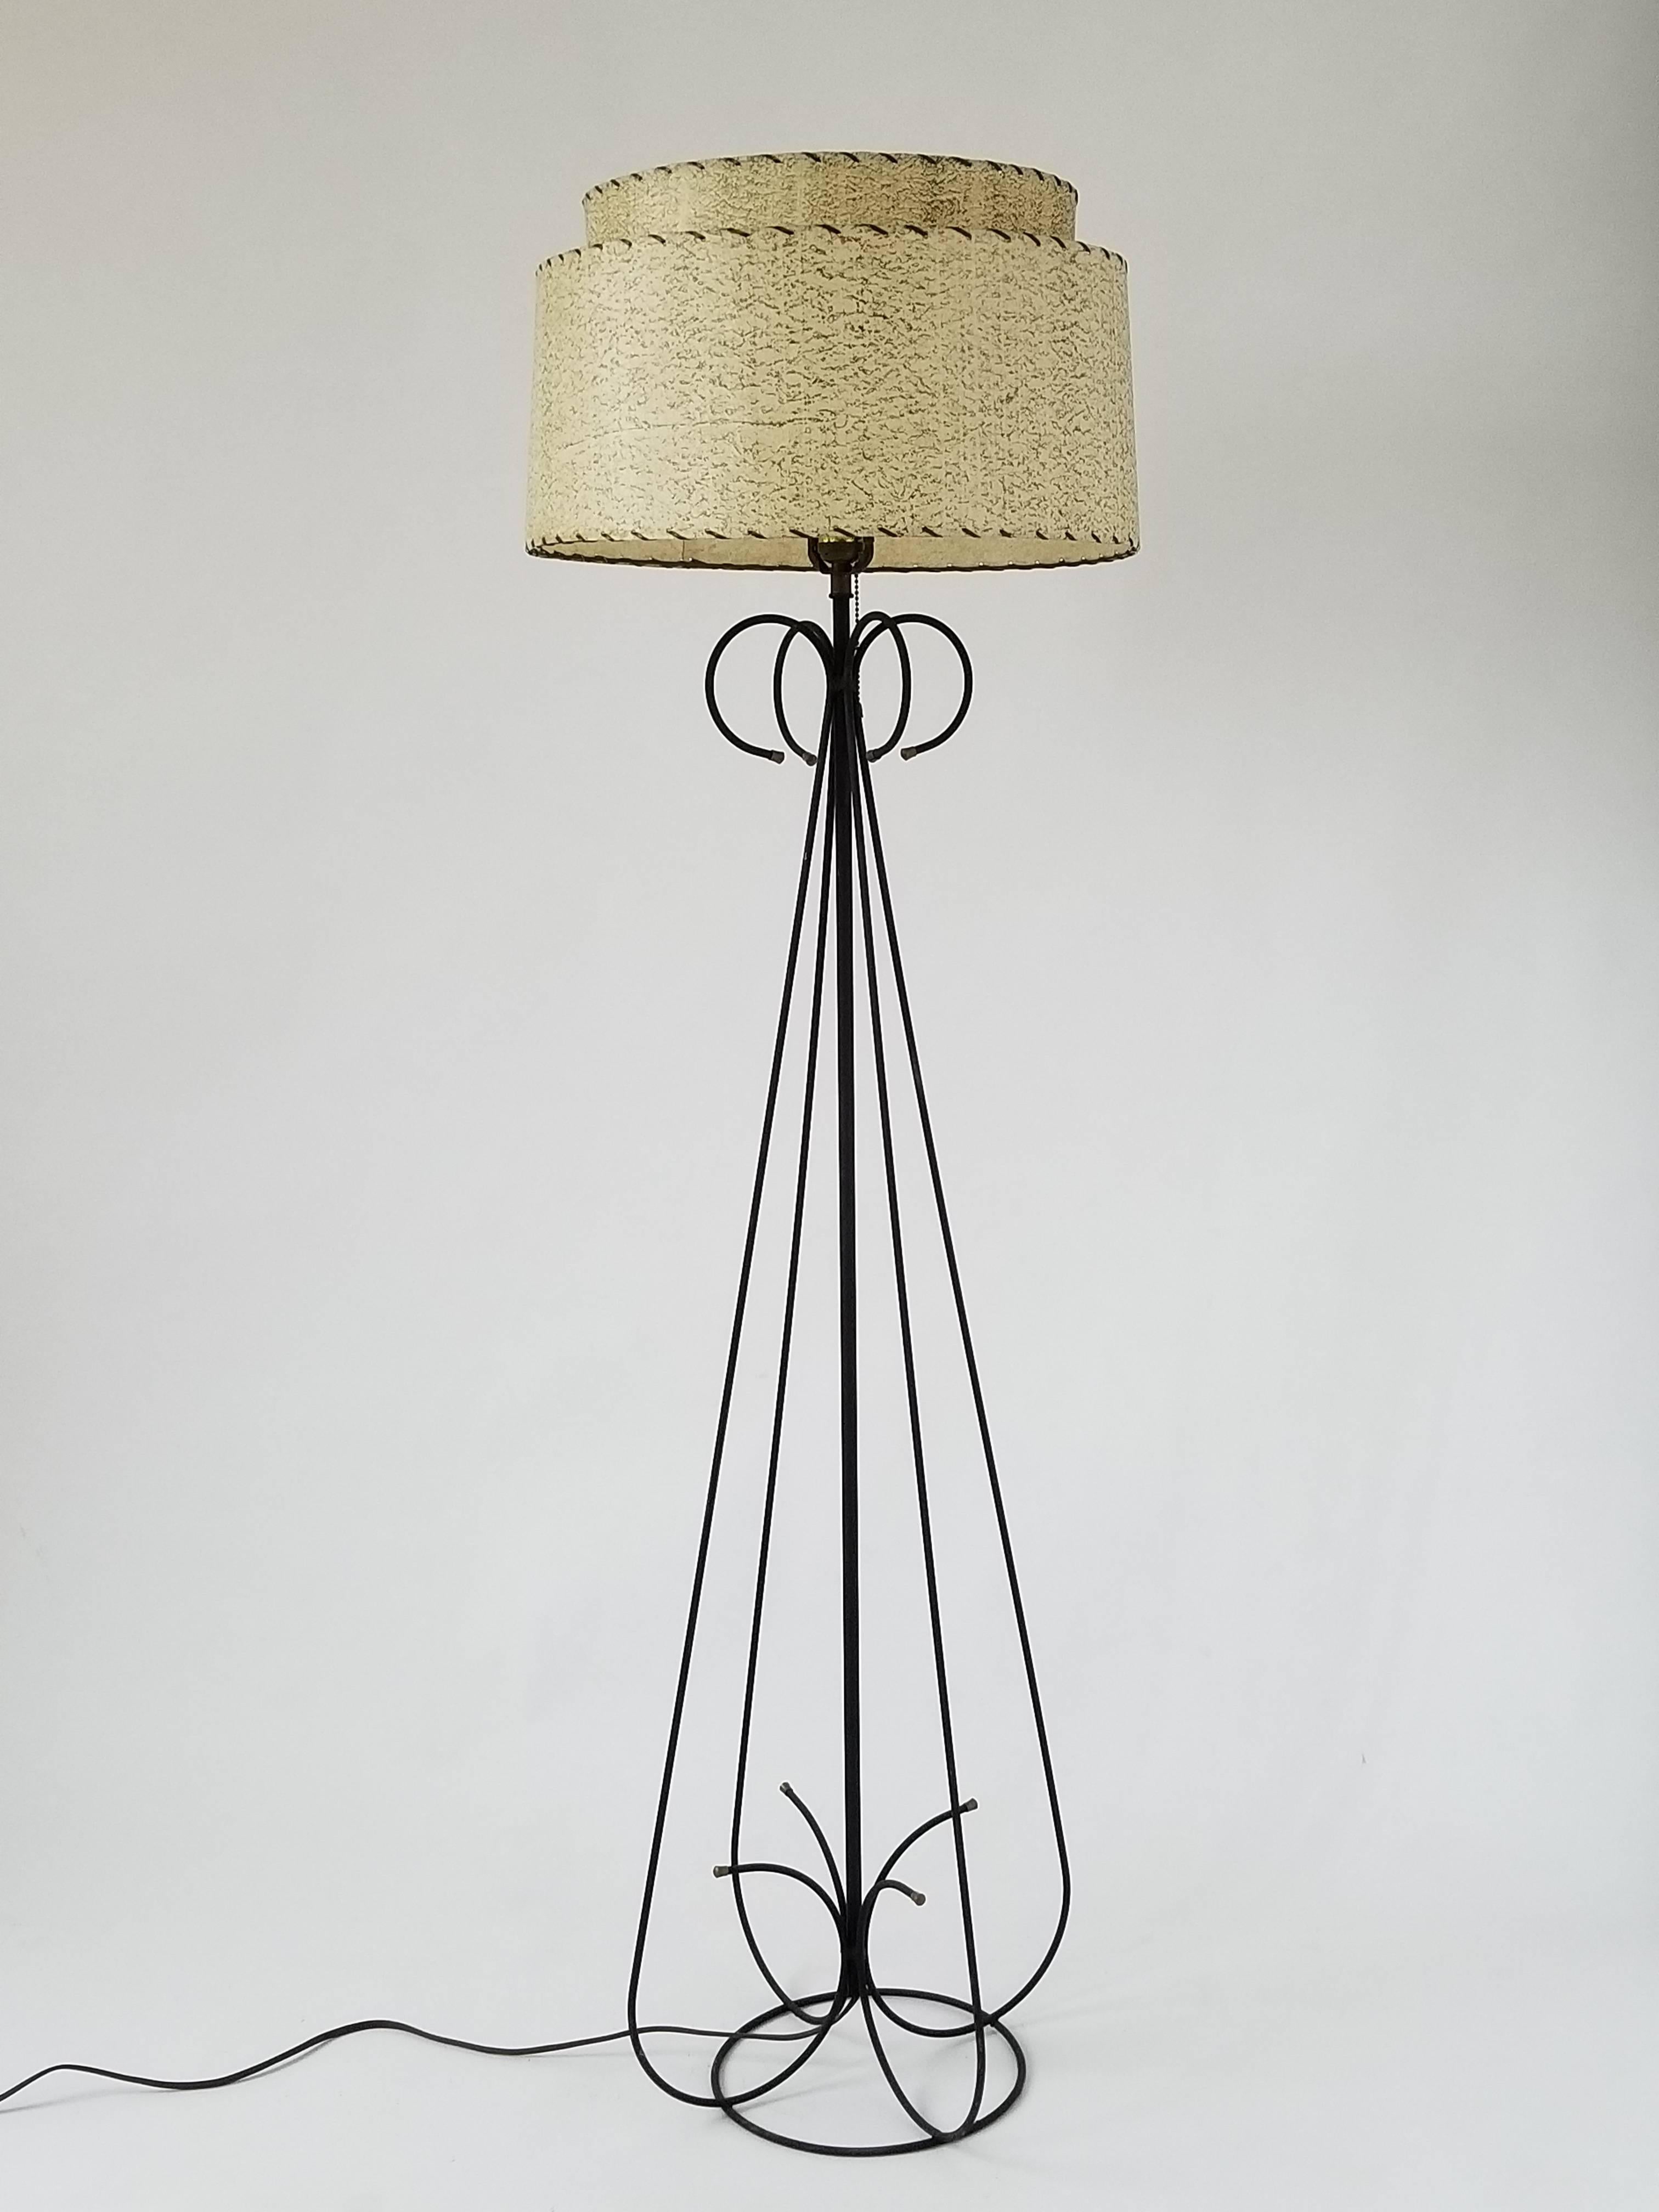 Structure made of enameled steel wire. 

Contain one E26 size socket rated at 100 watt max. 

On/off pull chain 

Fiberglass shade supplied with order. Measure 17.5 in wide x 10 in. high. 

Lamp with shade measure 59 inches high.